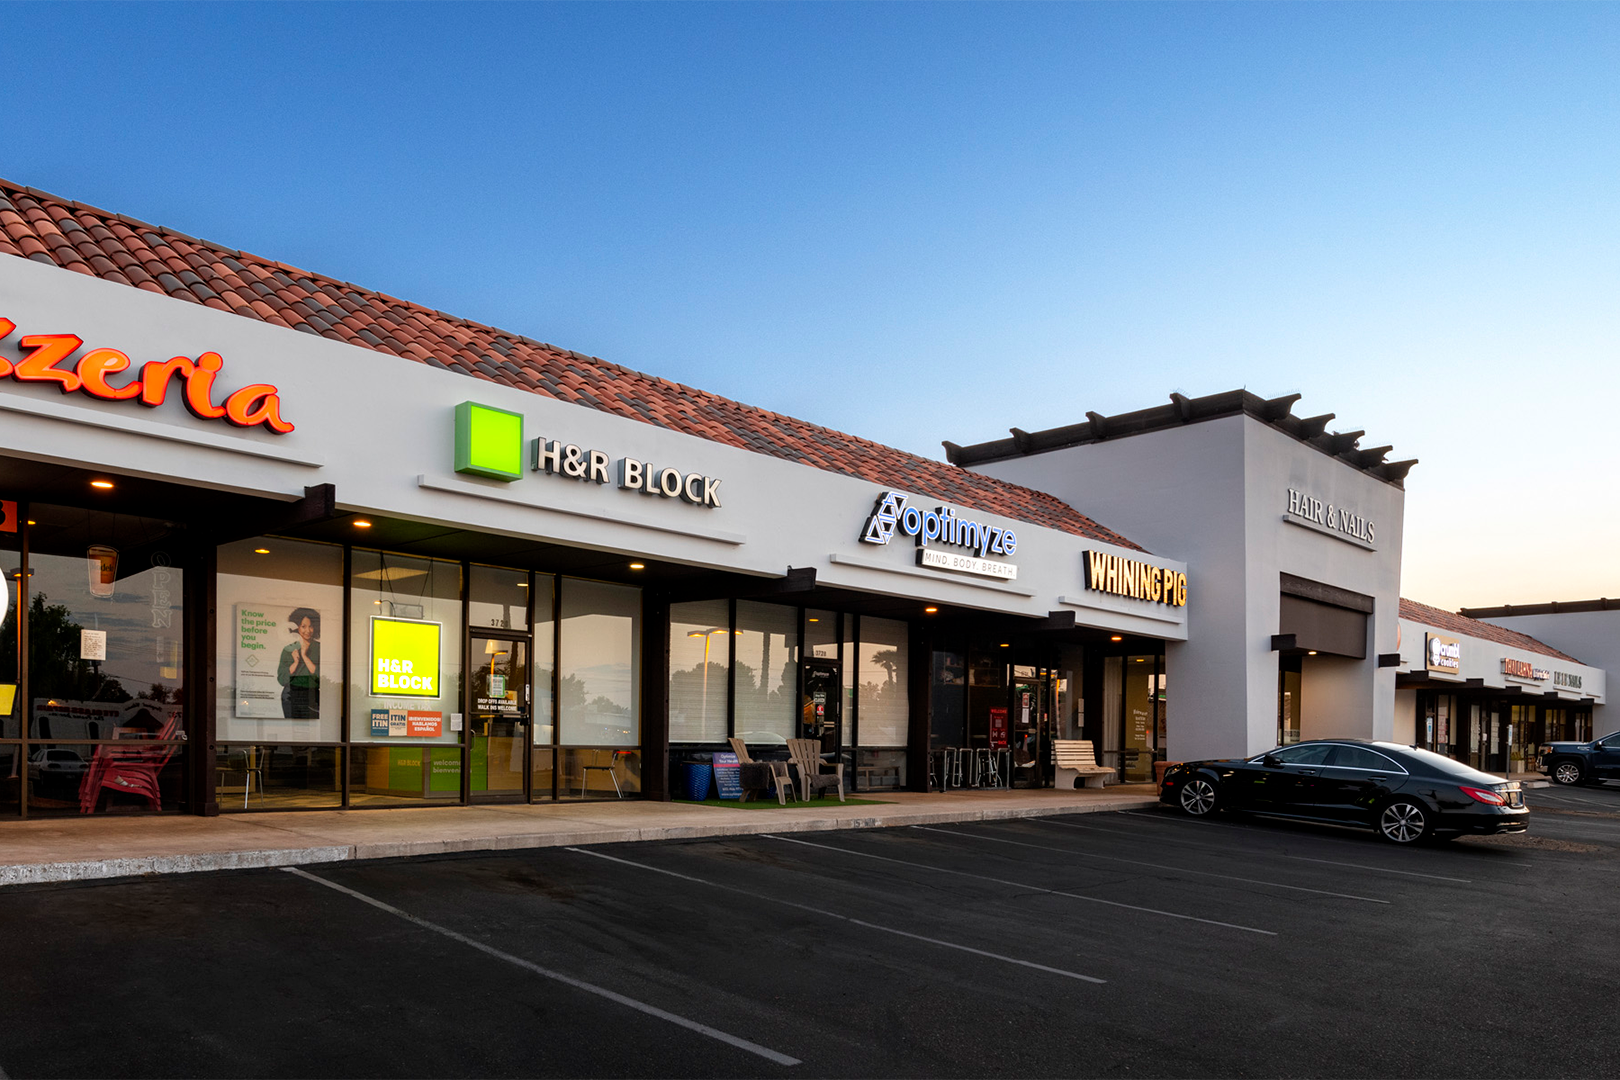 The Shops at 38th is a Multi-tenant Neighborhood retail center at 3720-3750 E Indian School Rd in Phoenix, Arizona